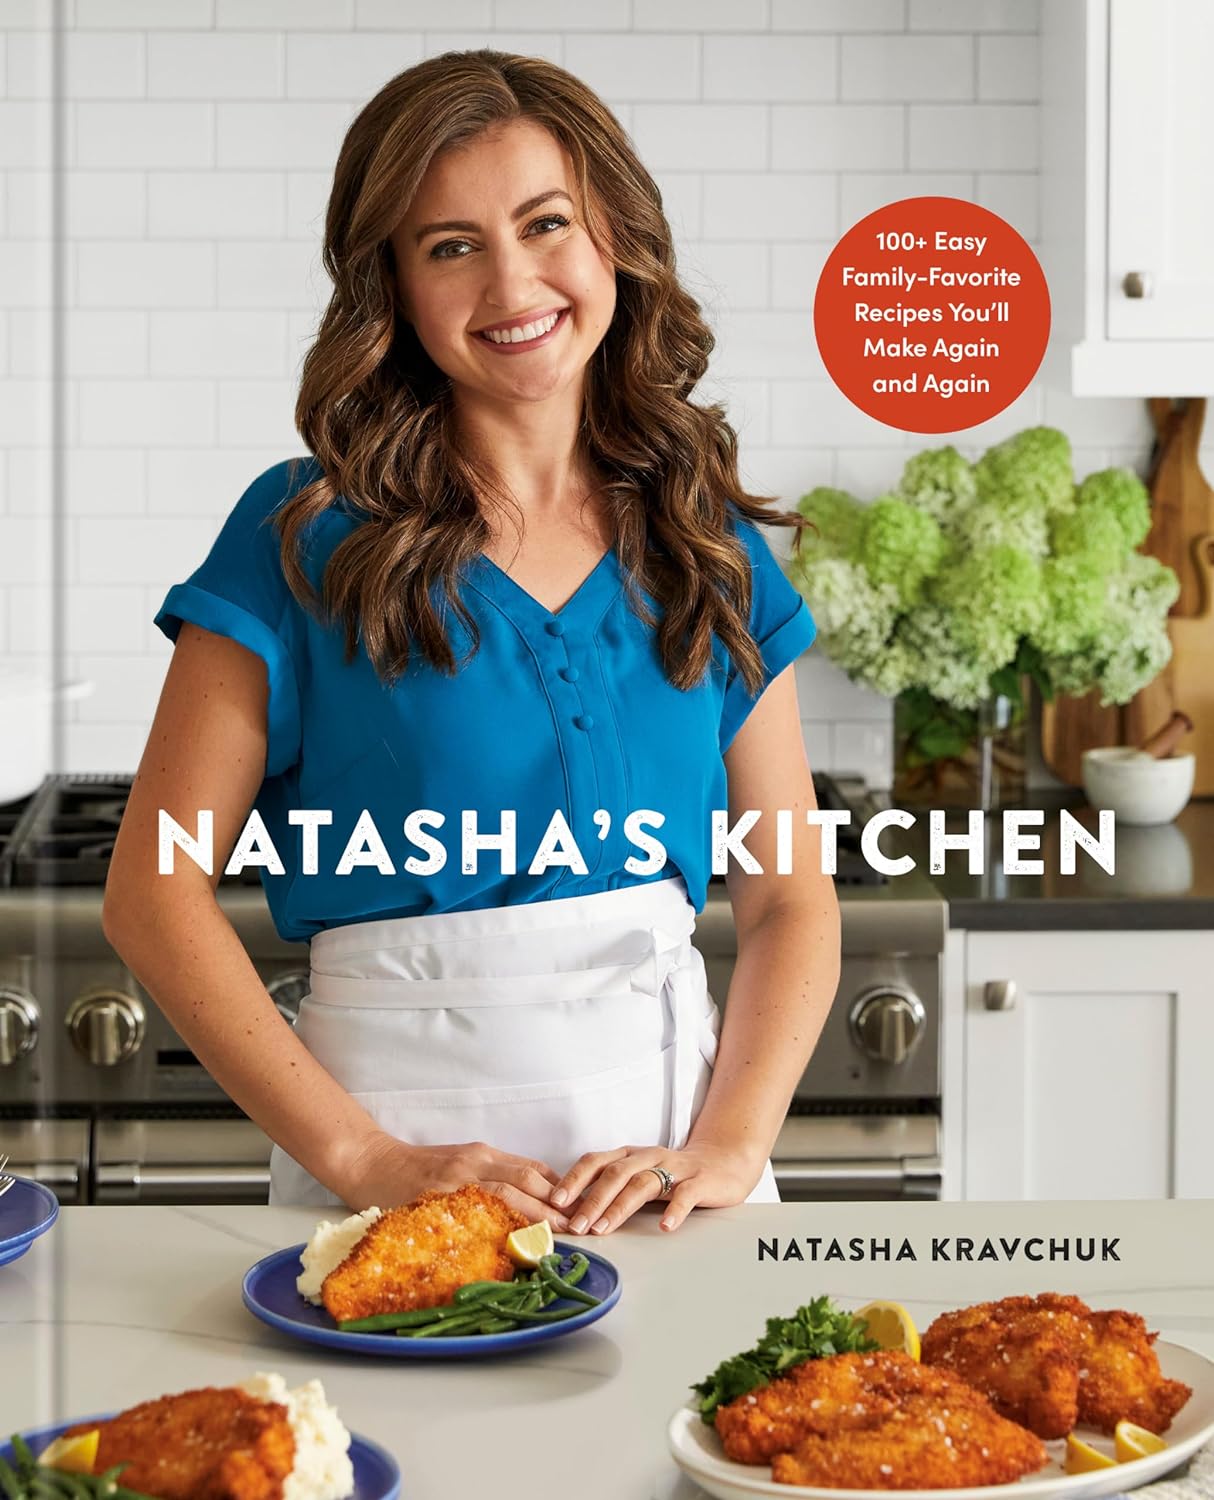 Front Cover of Natasha's Kitchen. Displayed homemade dinner meals